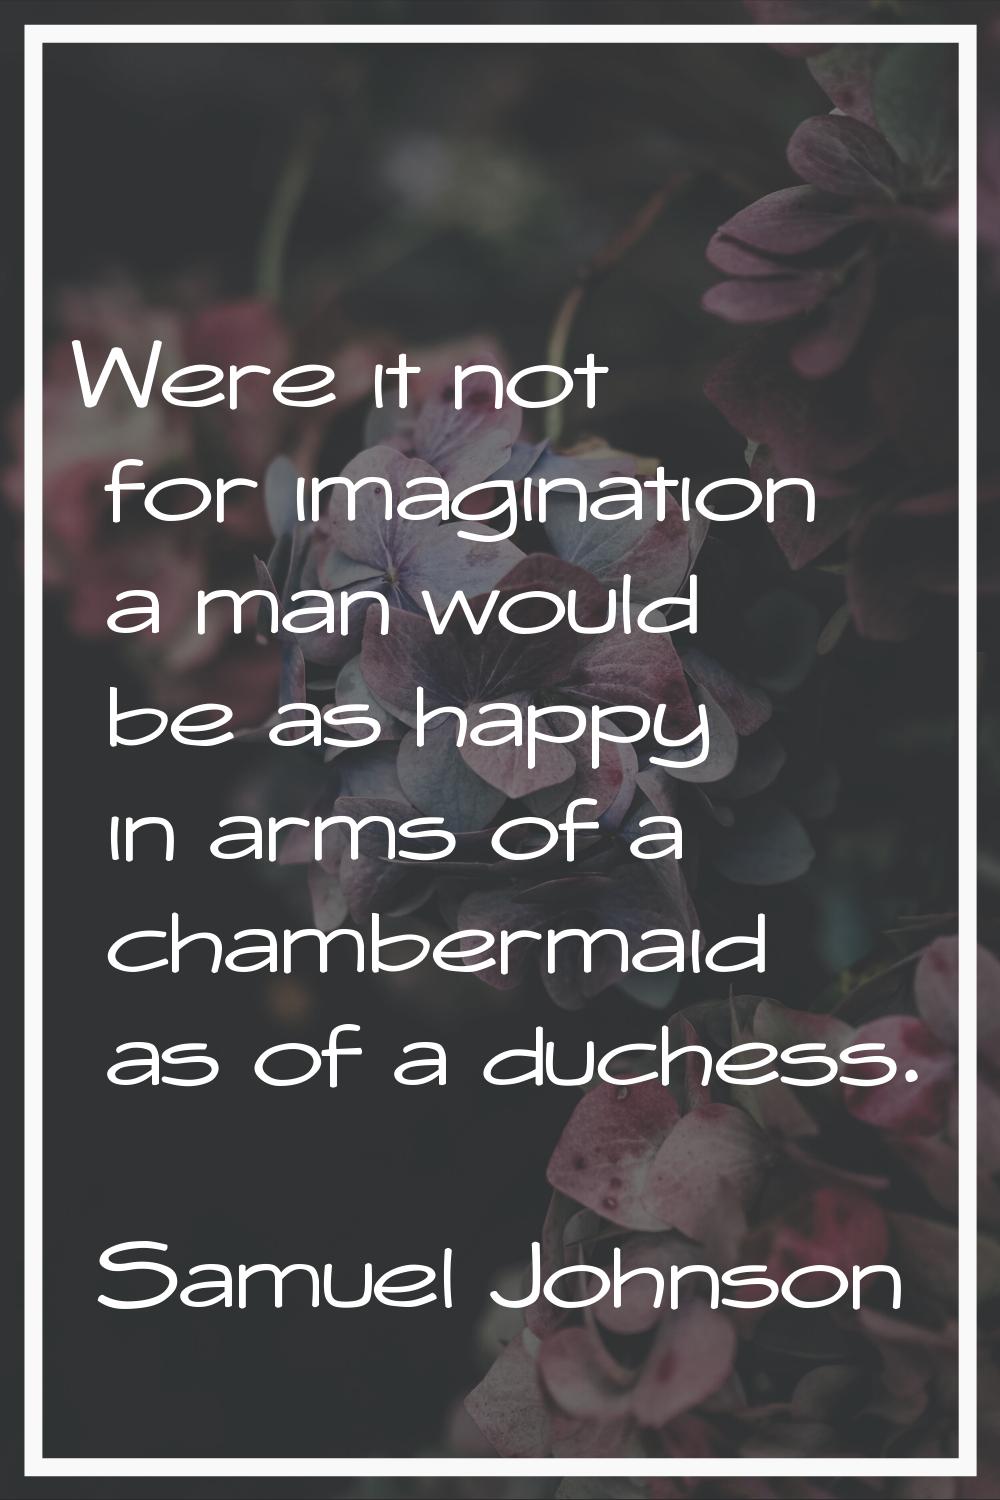 Were it not for imagination a man would be as happy in arms of a chambermaid as of a duchess.